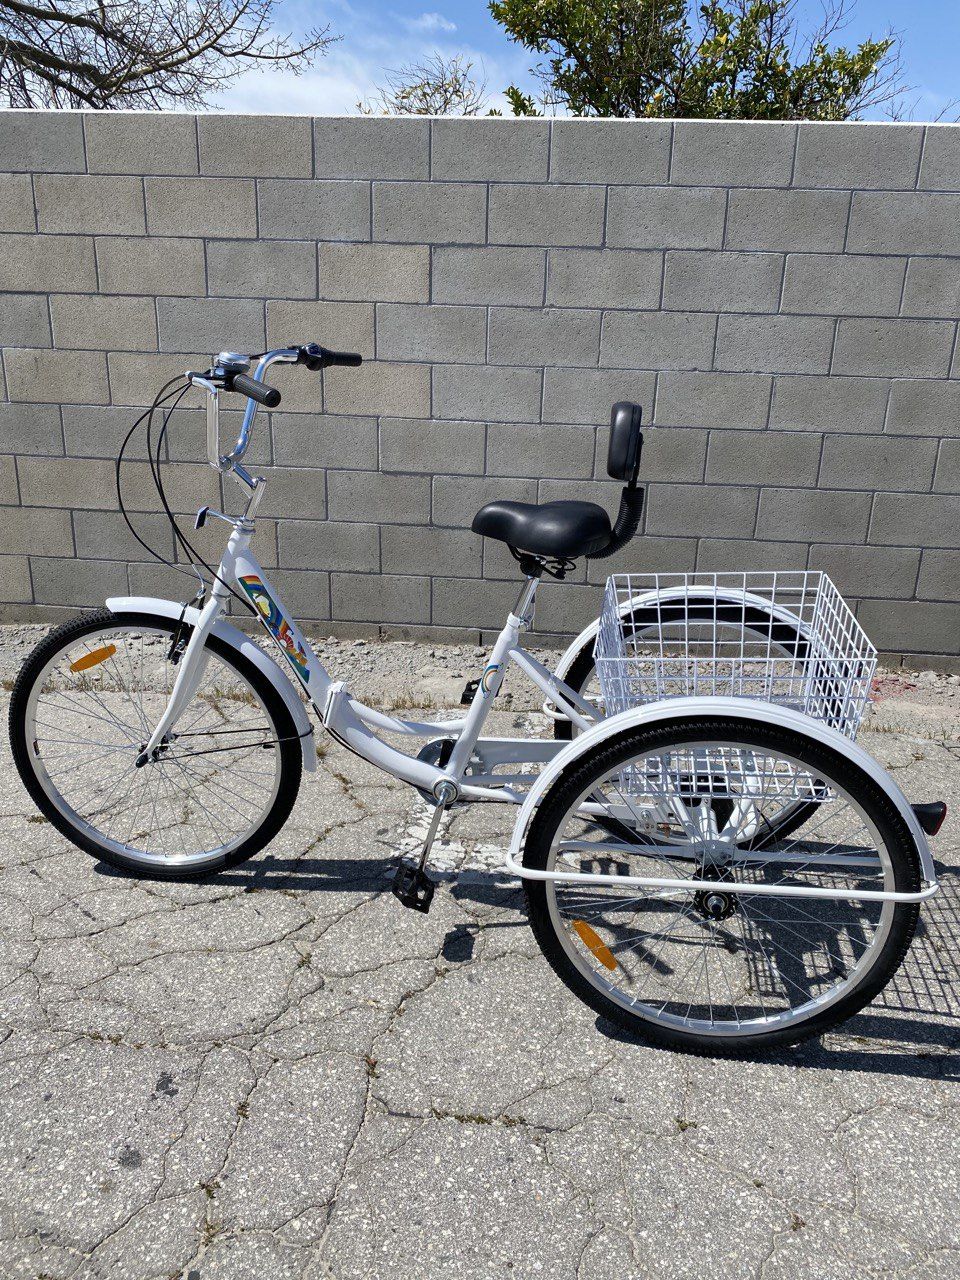 Adult Tricycle 26 in. 7 Speed Foldable Tricycle. PRICE. $250.00 FIRM!!